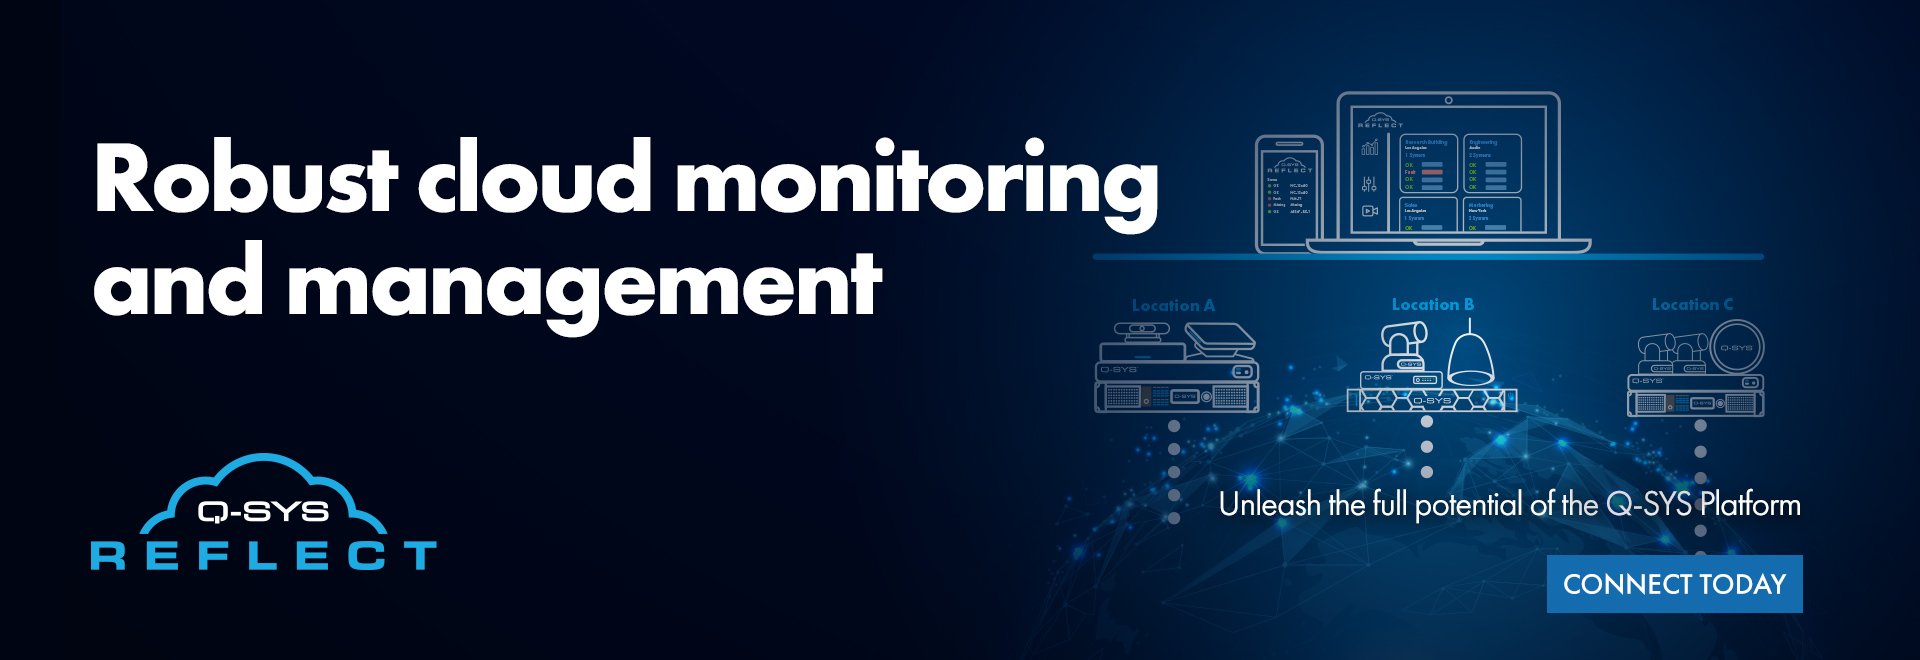 Q-SYS Reflect Banner-Text: "Robust cloud Monitoring and Management"